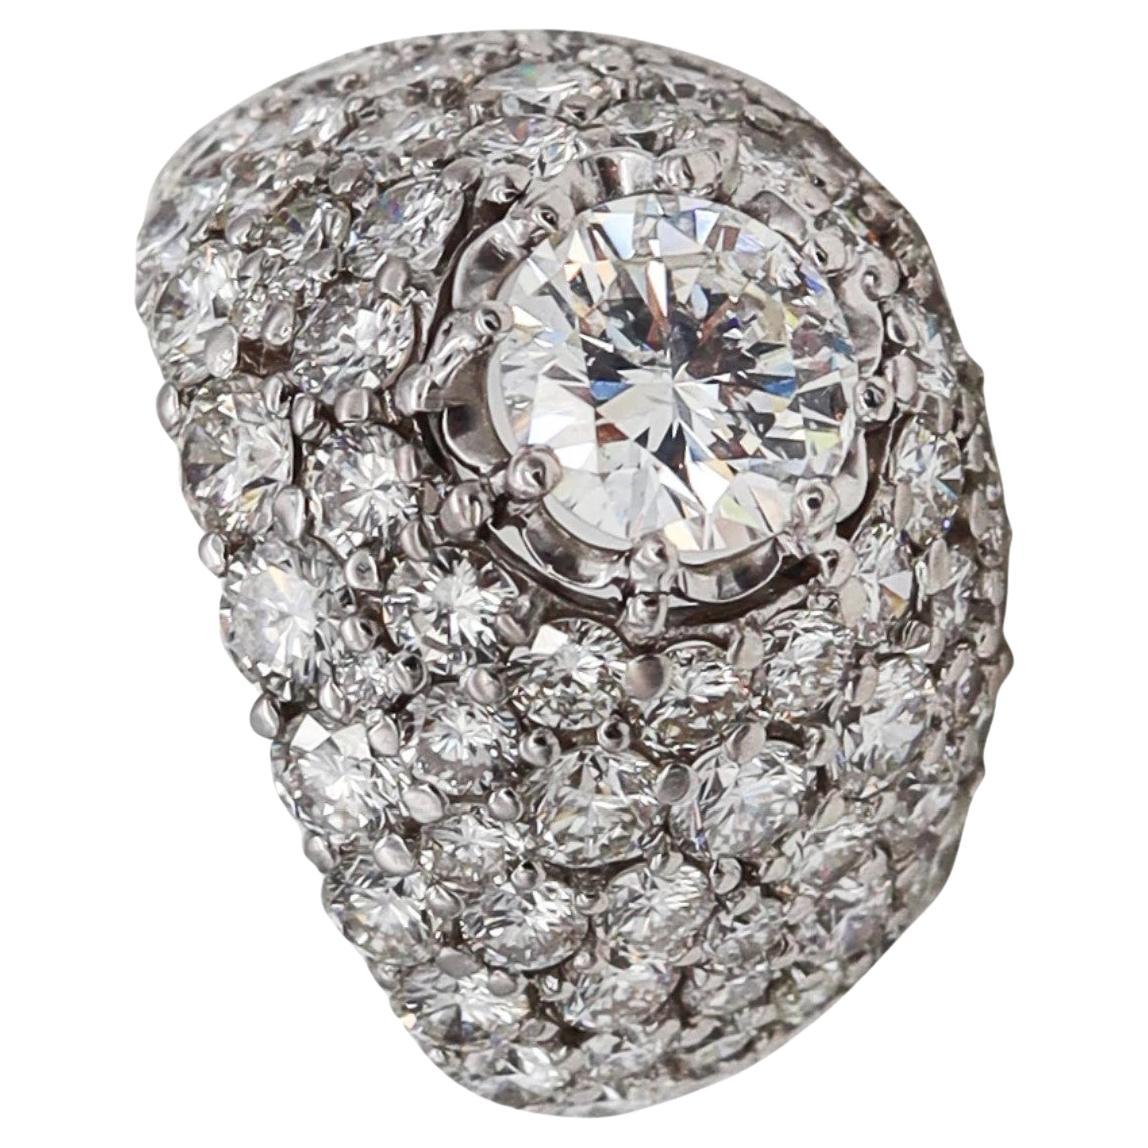 Yanes Exceptional Platinum Cluster Cocktail Ring Gia Certified 10.16 Ctw Diamond